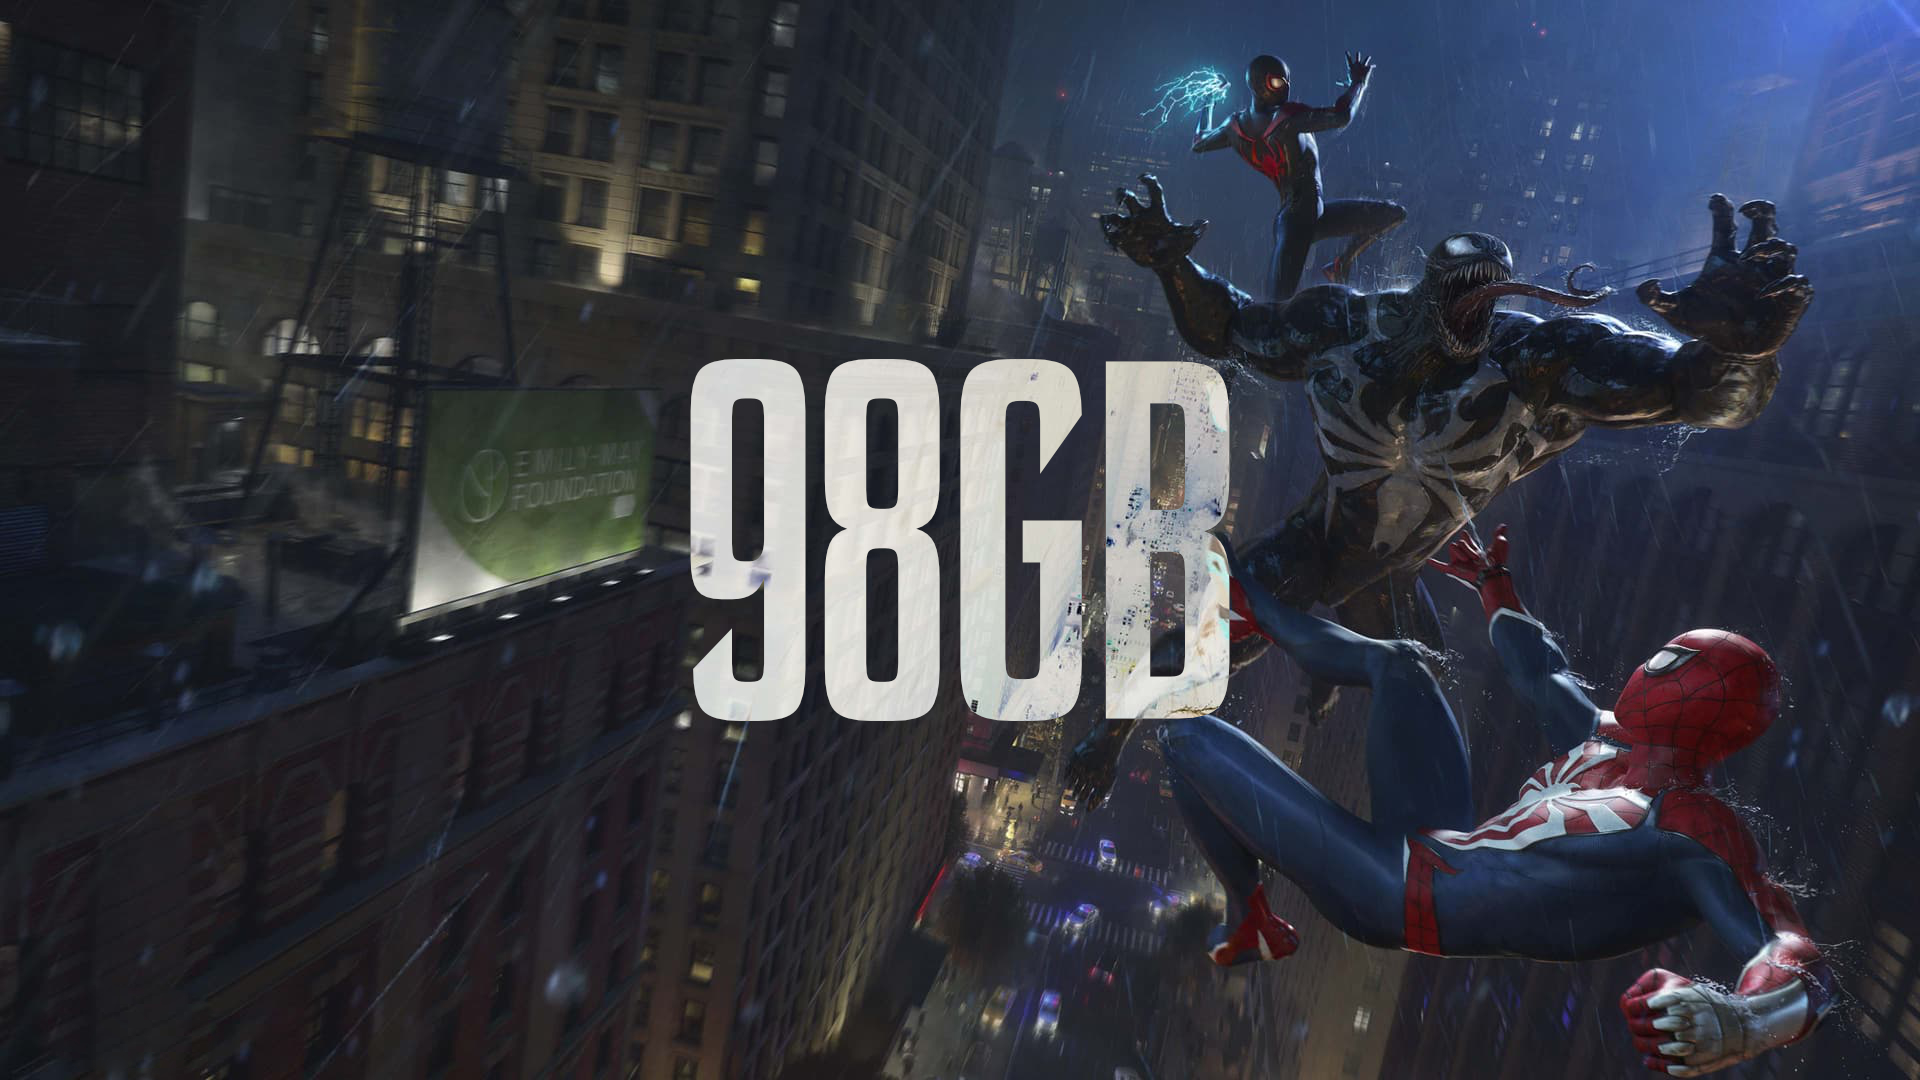 Spider-Man 2's file size is almost double that of the first game